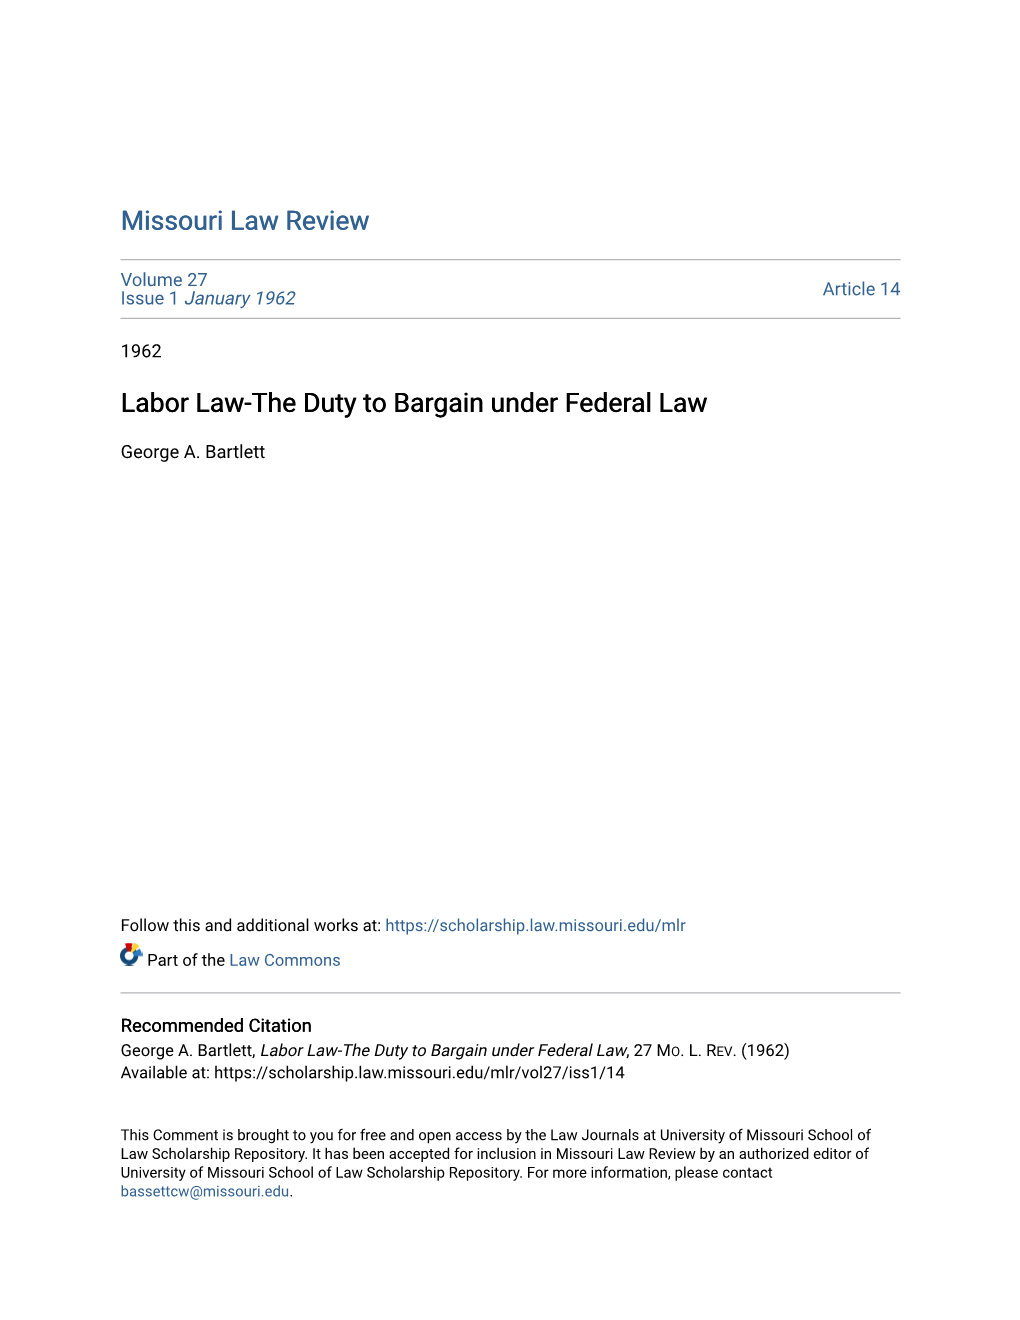 Labor Law-The Duty to Bargain Under Federal Law